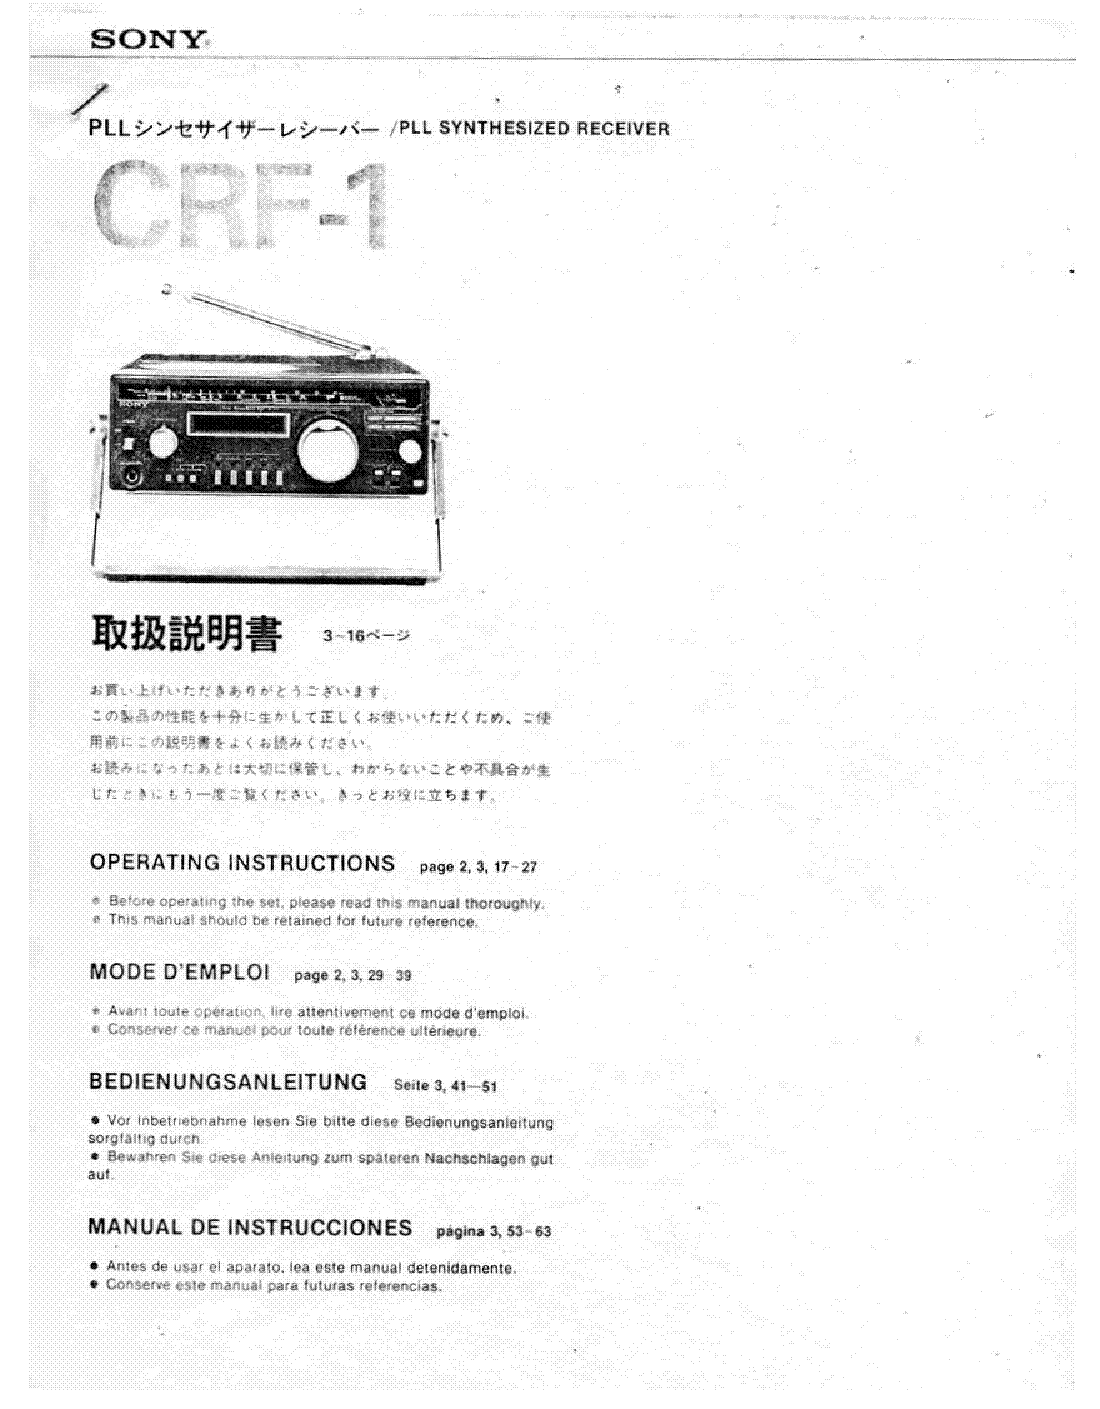 SONY CRF-1 RECEIVER service manual (1st page)